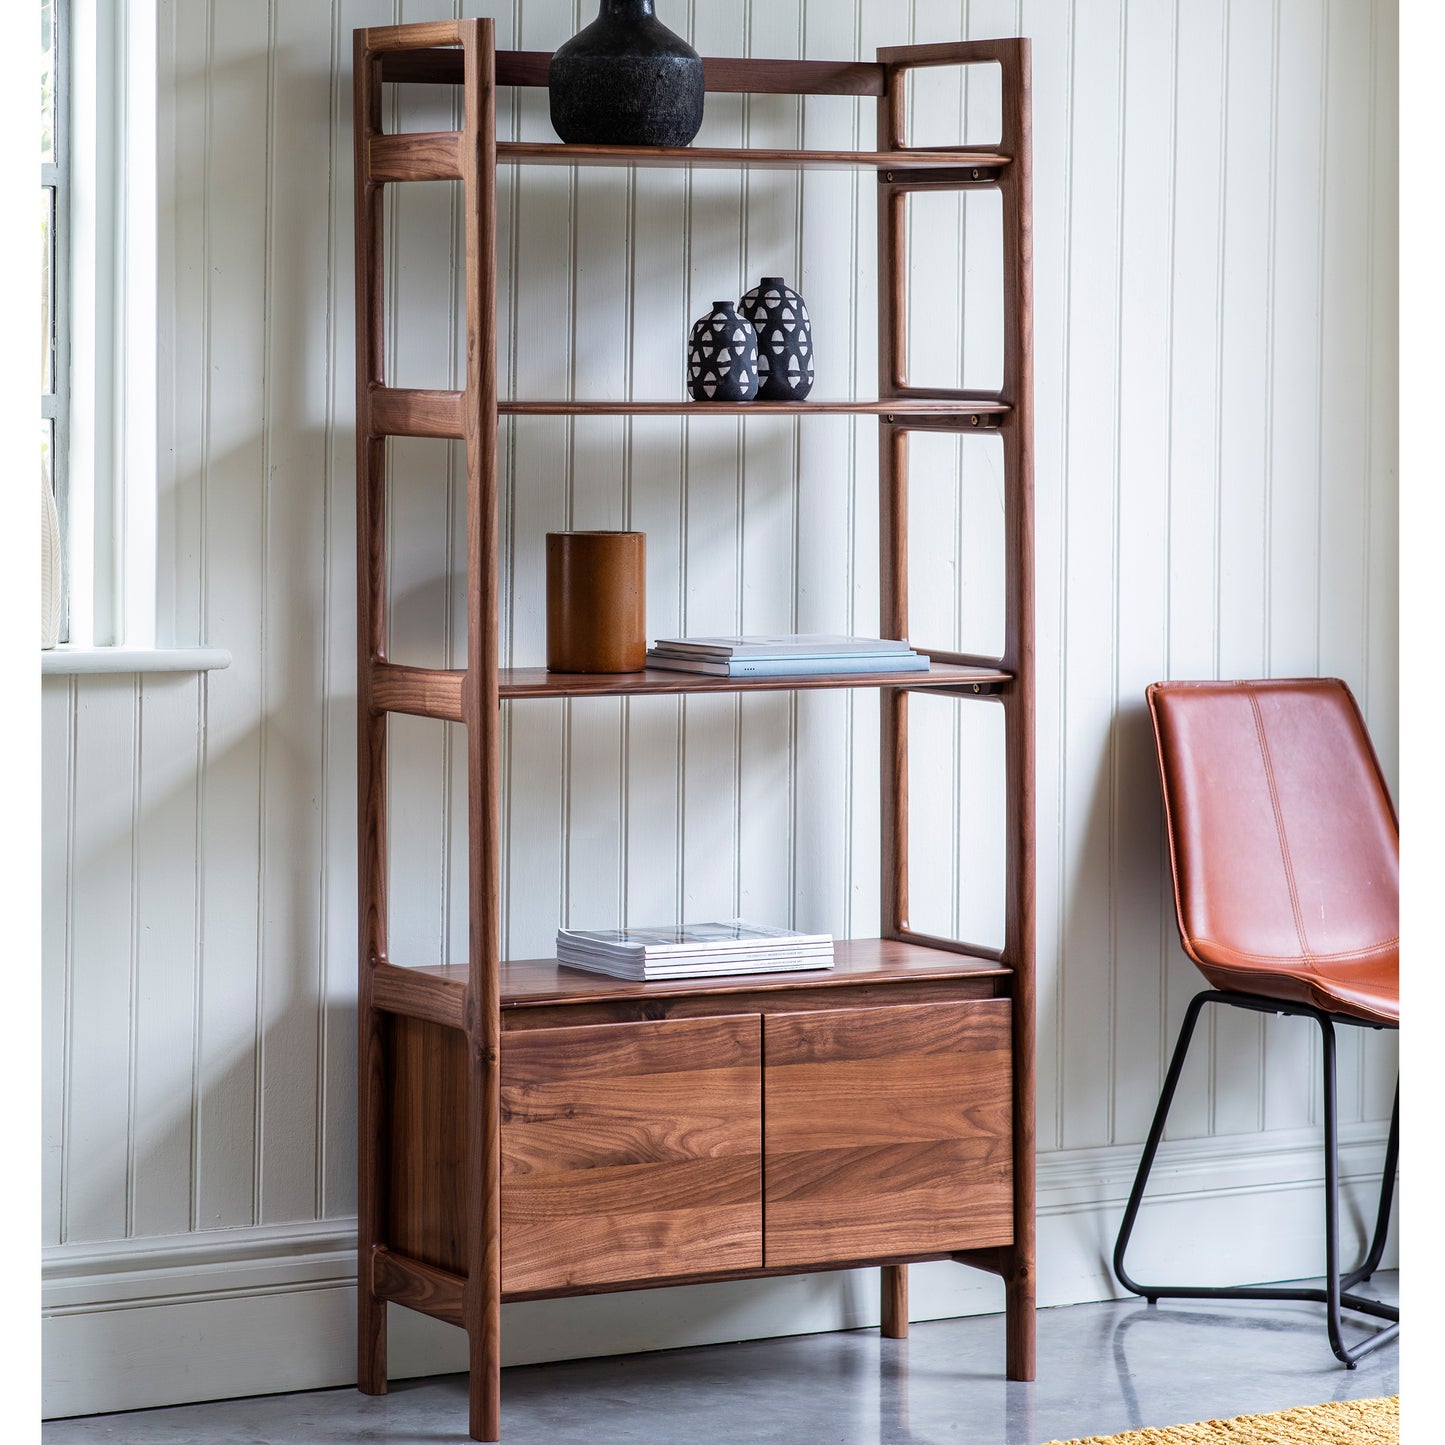 An interior decor bookcase from Kikiathome.co.uk in a room with an orange chair.